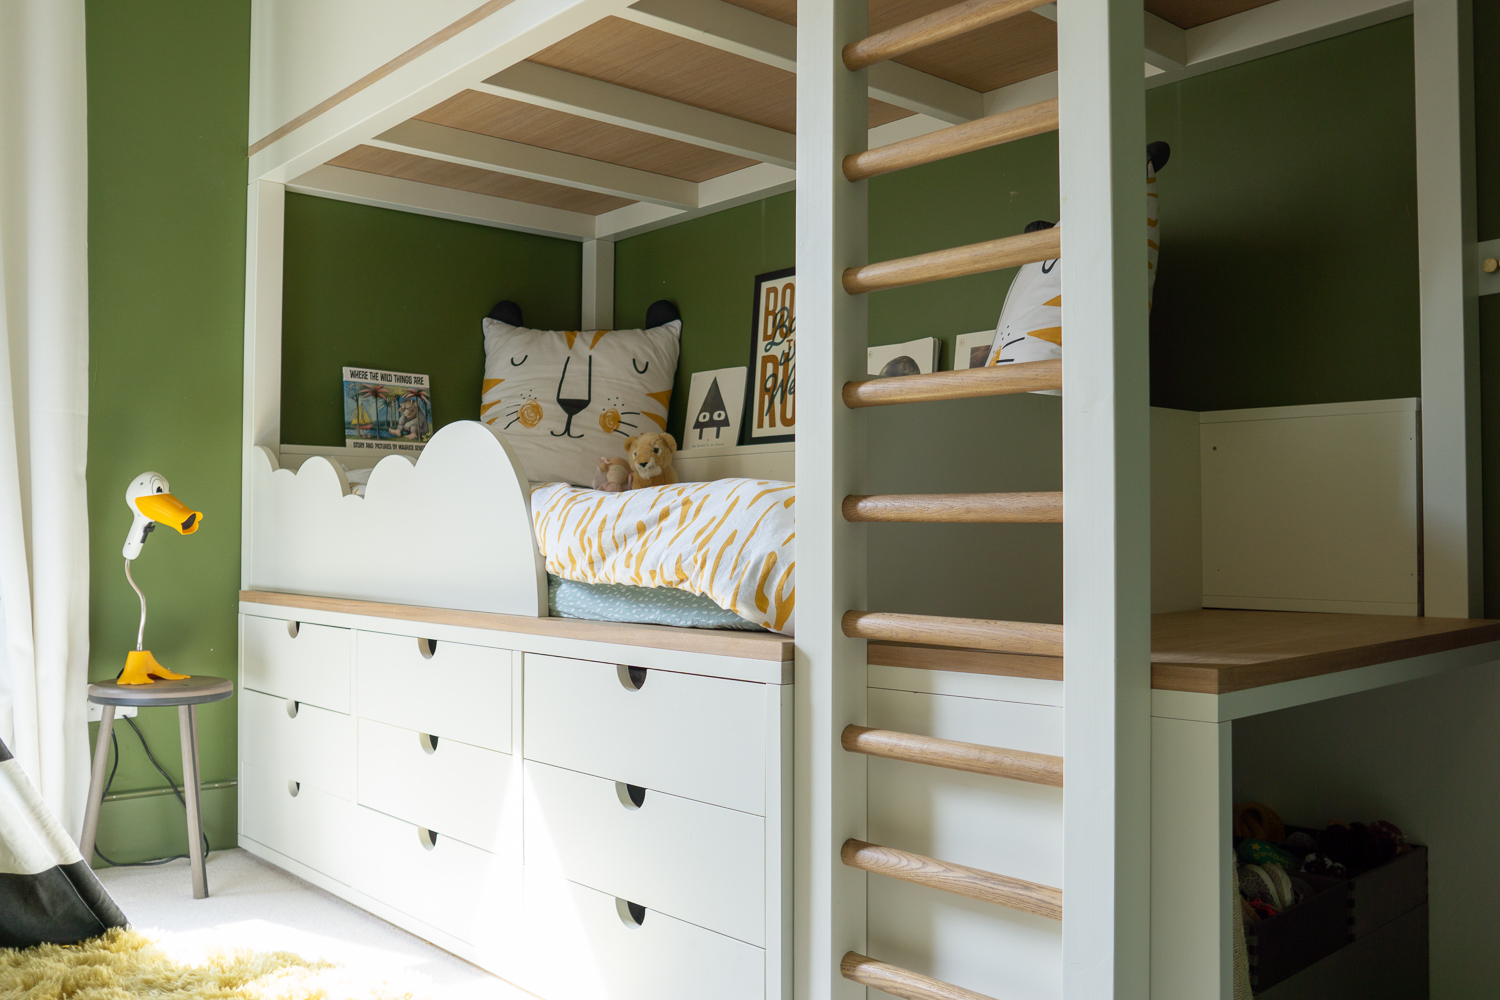 Bunk Bed, Based on a captains bed. Extra chunky timber frame. The lower cloud is removable so as to transform into daybed. Has desk / changing area.
